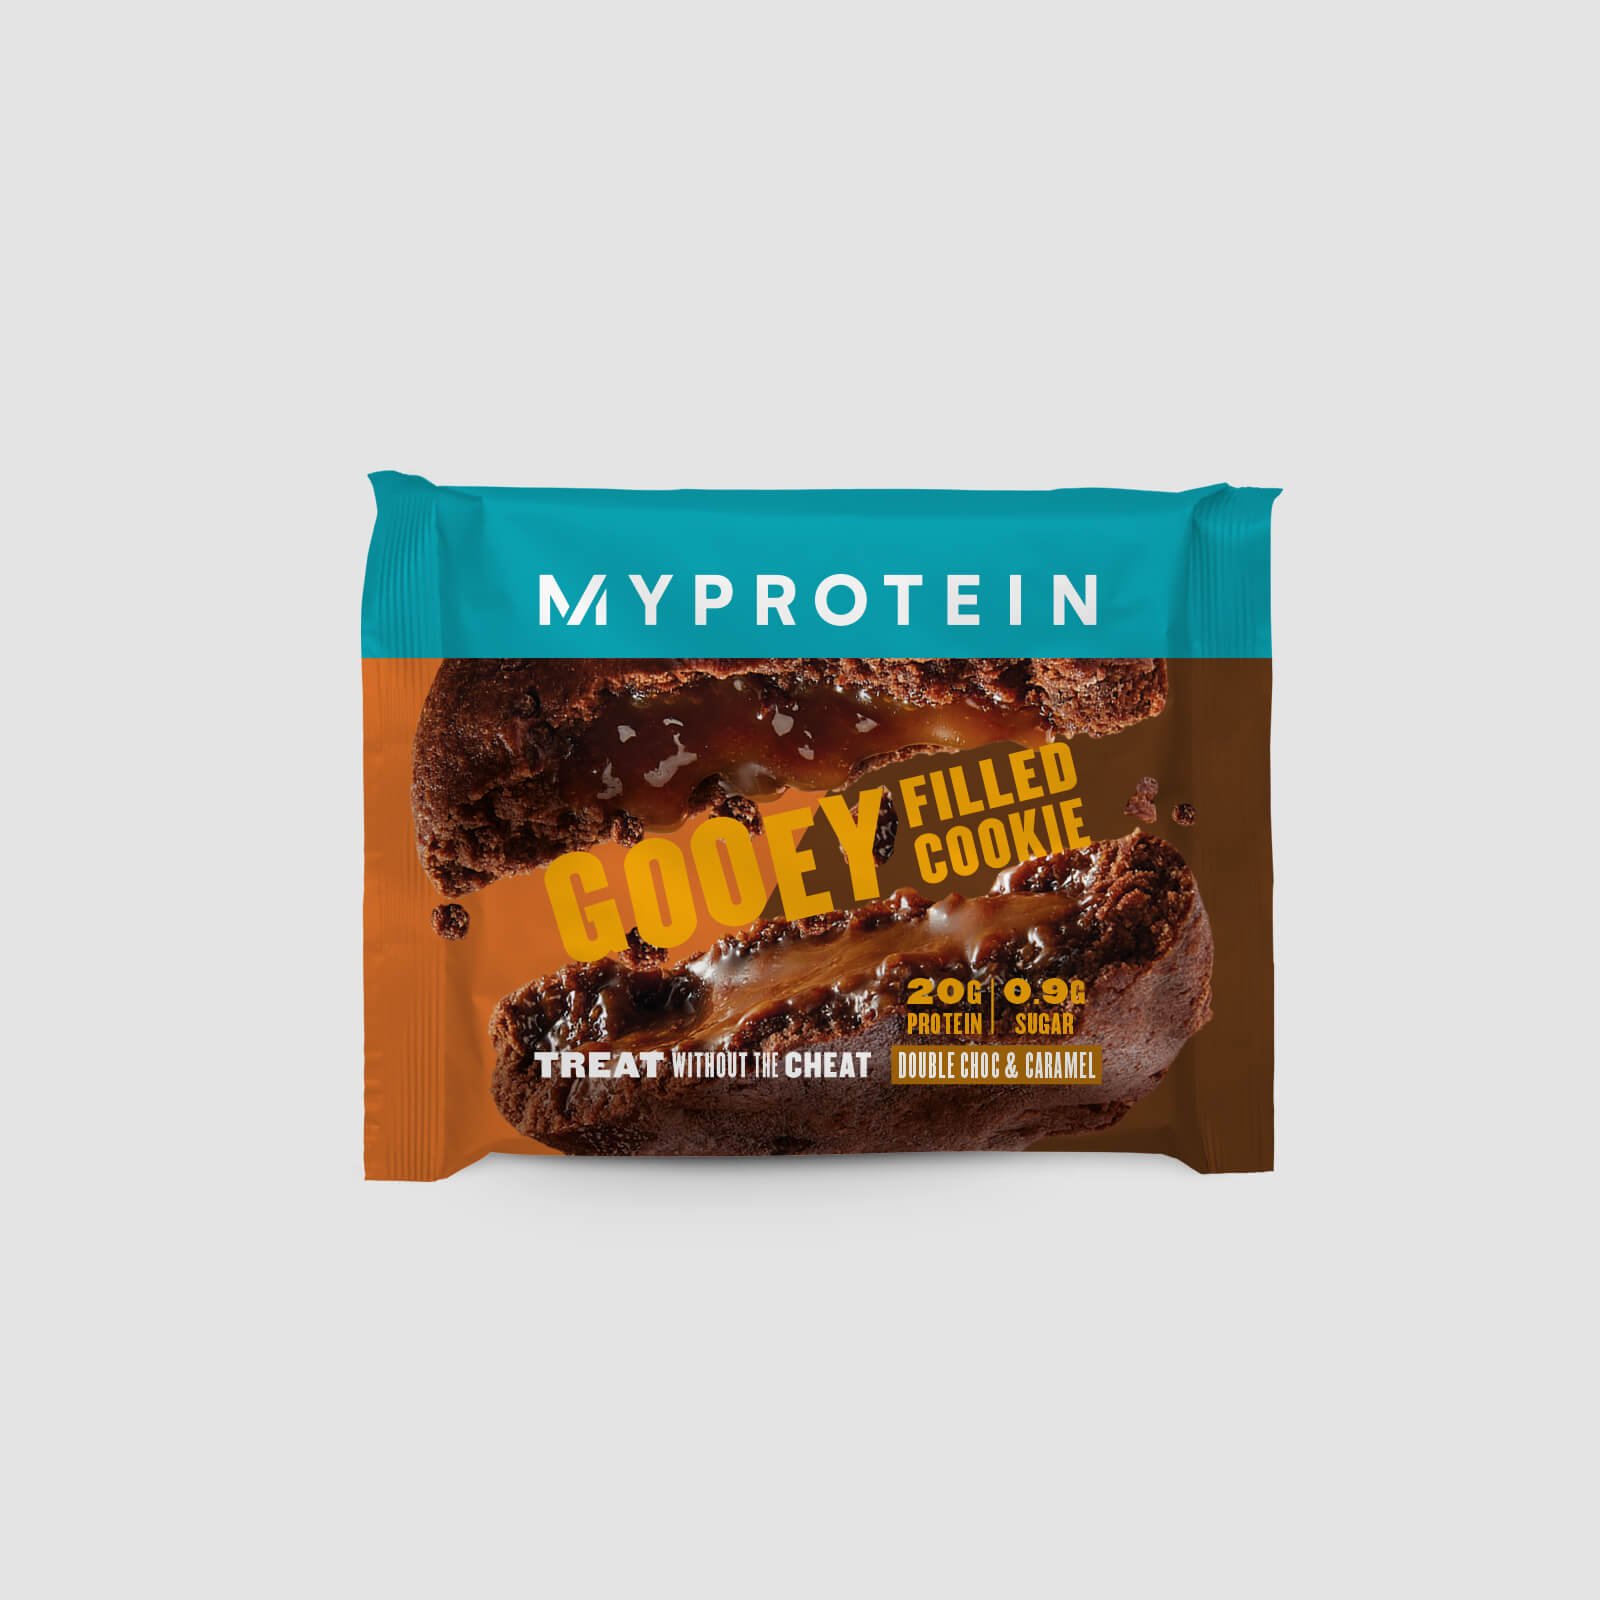 Myprotein Protein Filled Cookie (Sample) - Double Chocolate and Caramel